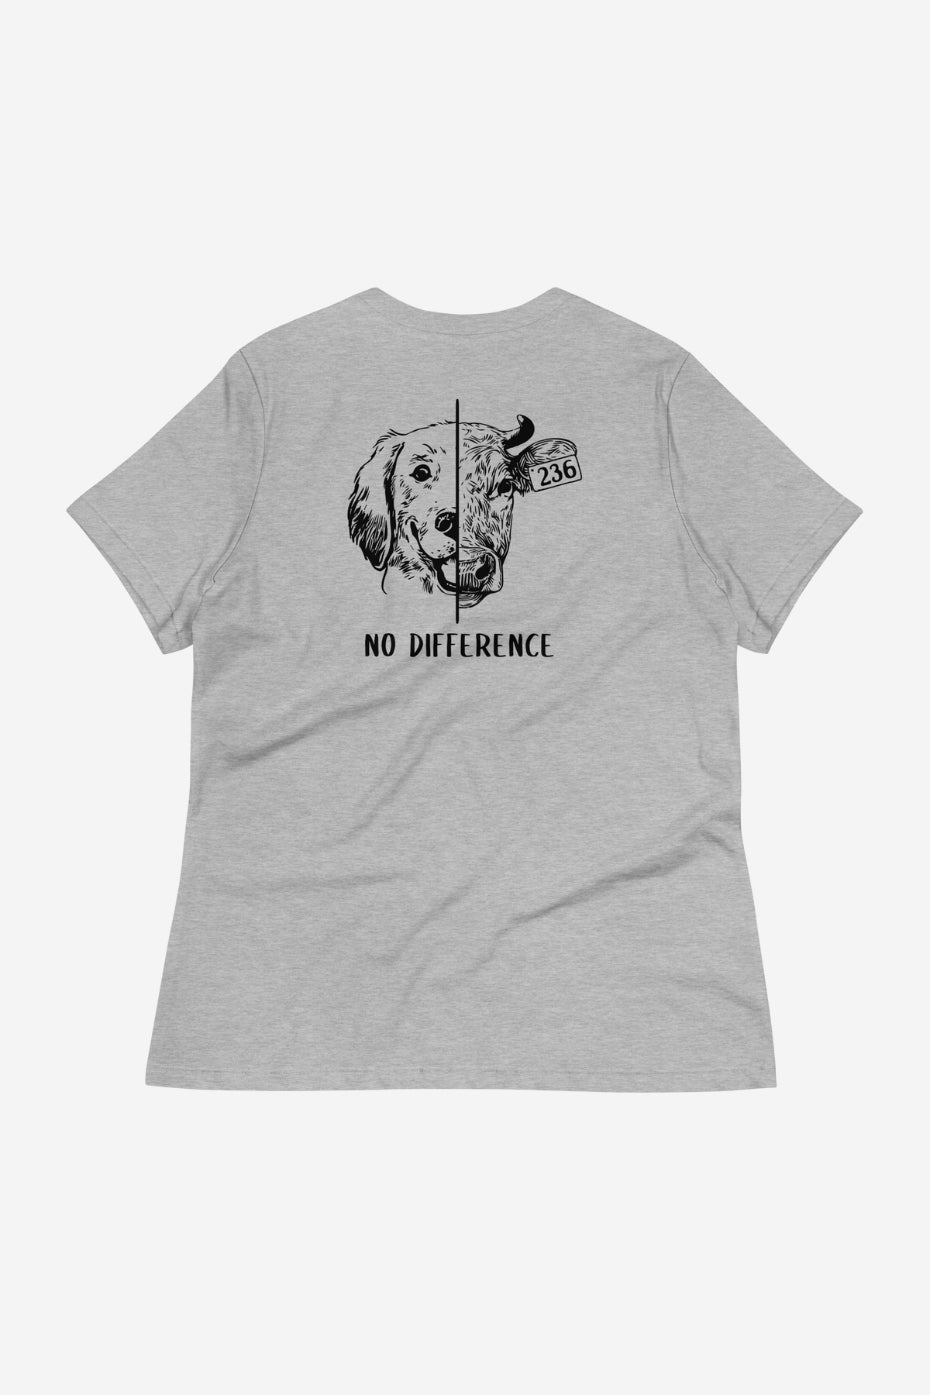 No Difference Women's Relaxed T-Shirt (Back Print)